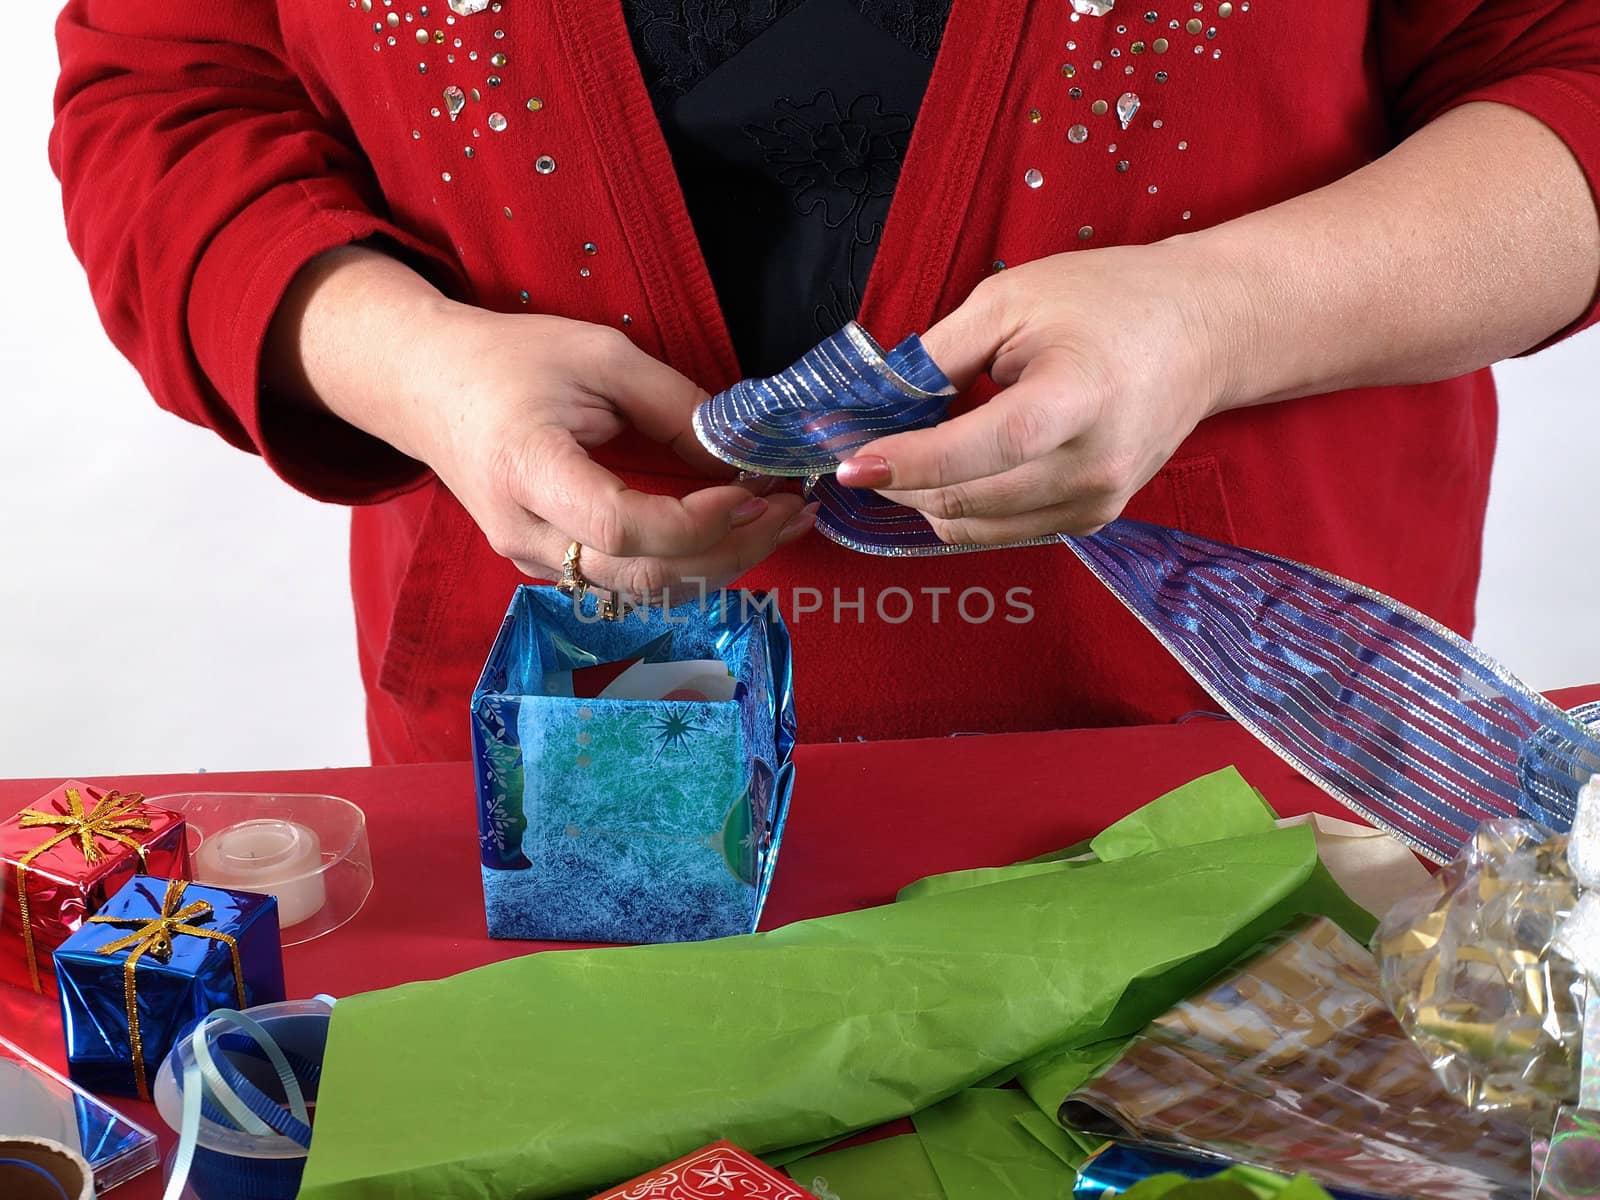 A woman forms a blue bow out of a shiny ribbon as she wraps a present.